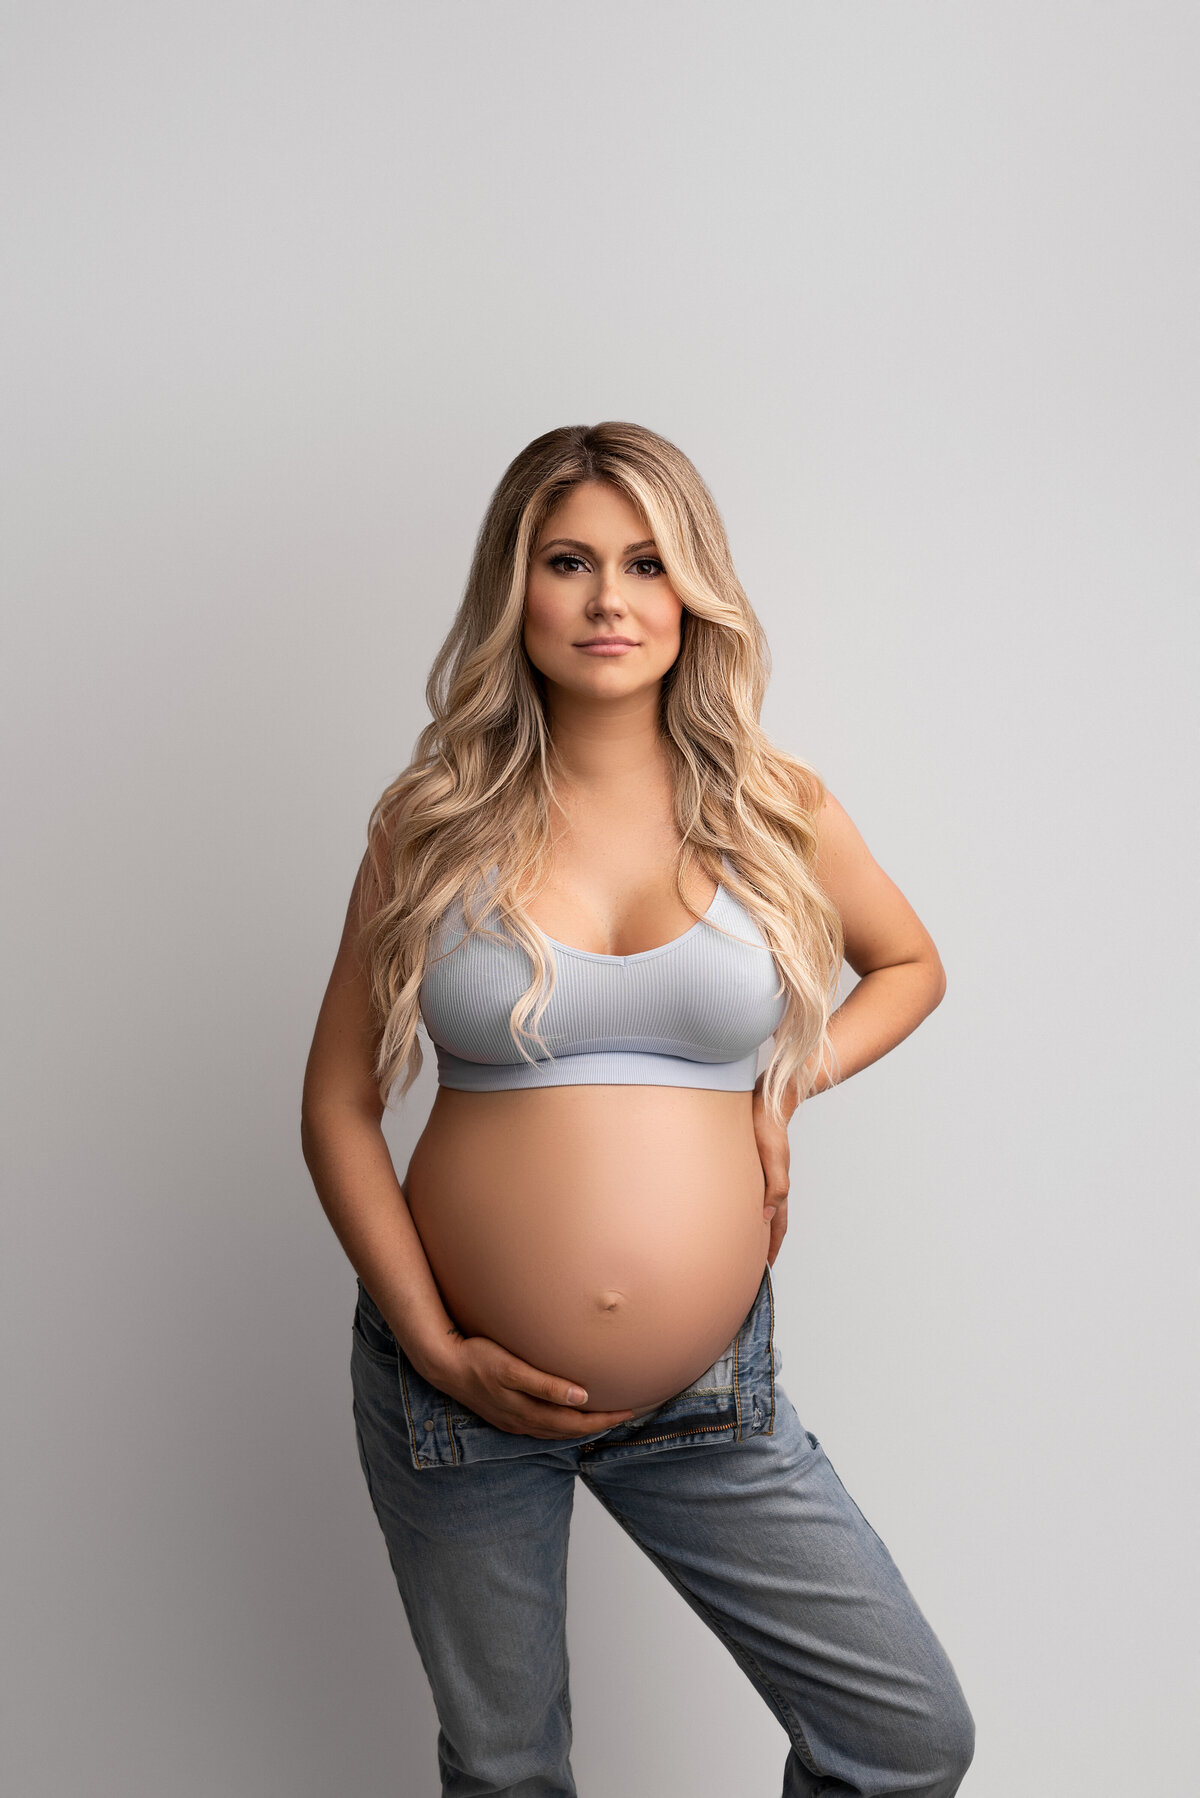 New Jersey's best maternity photographer Katie Marshall captures expectant mom for fine art maternity photos. Woman in unbuttoned jeans and grey sports bra stands facing the camera. One hand is under her bump, the other is at the small of her back. She is looking at the camera with a closed-mouth smile and her long blonde hair trails over her shoulders.